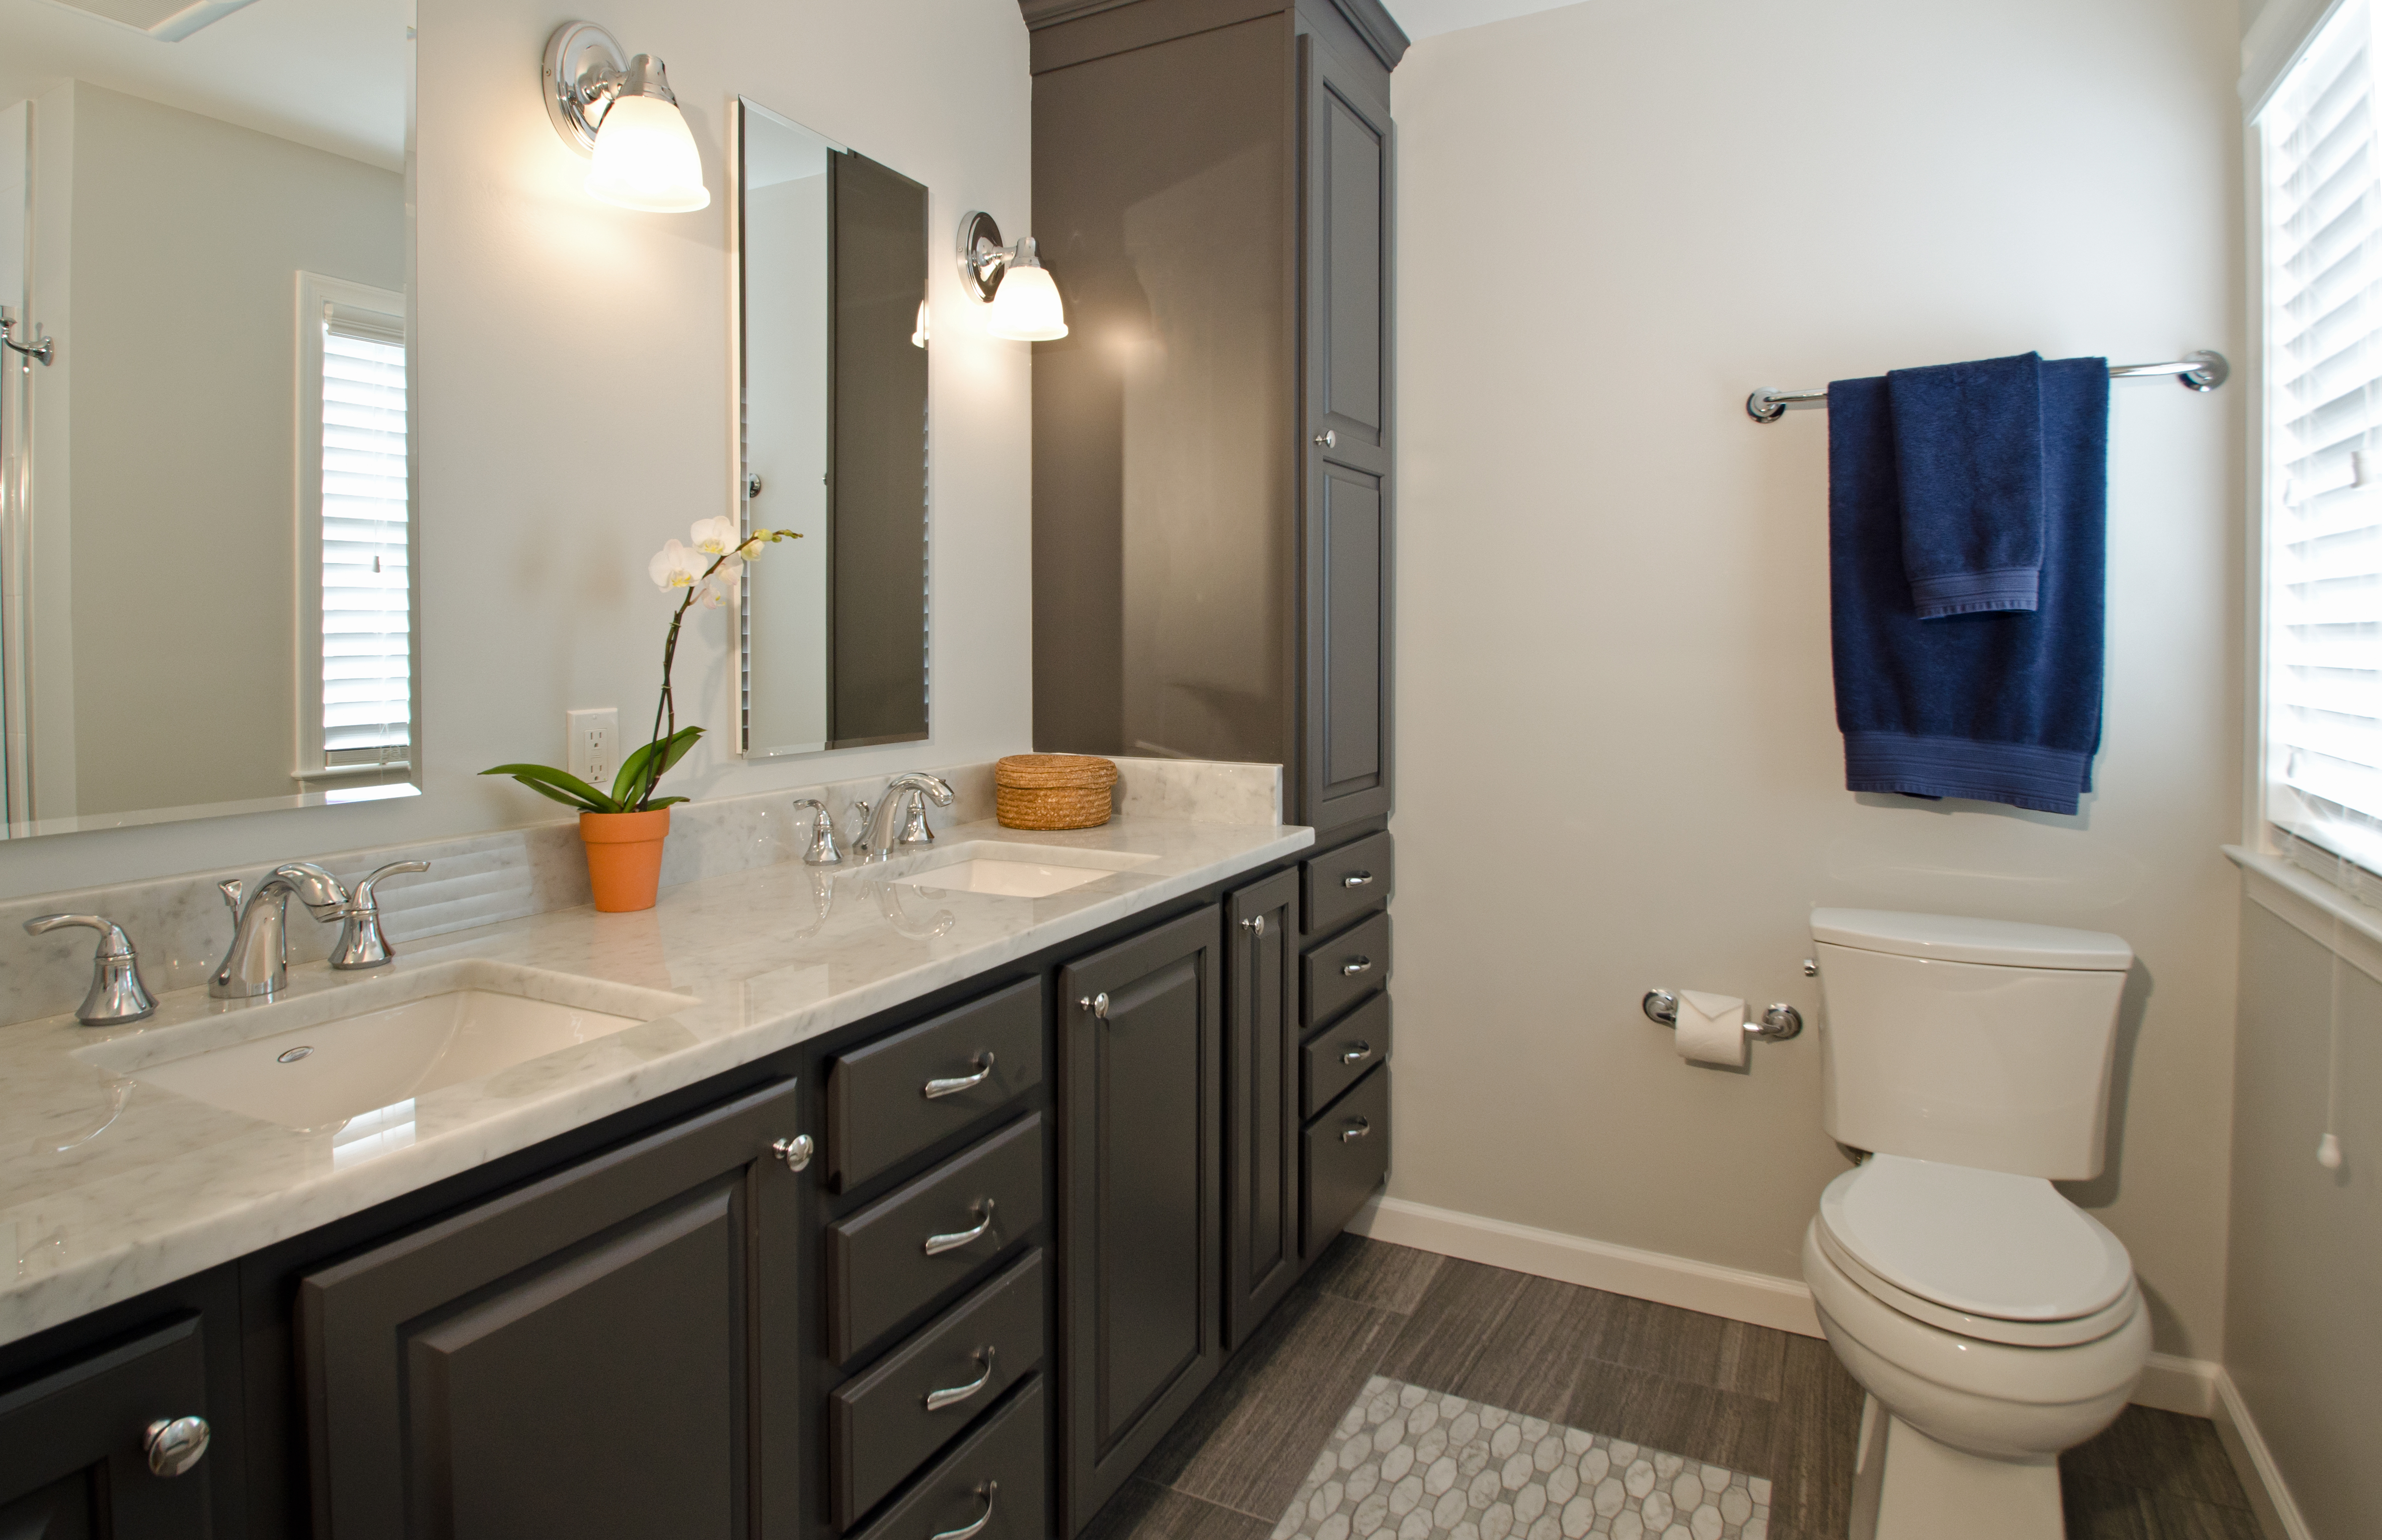 Top 10 Bathroom Trends For 2018, What Is The Most Popular Color For Bathroom Vanities